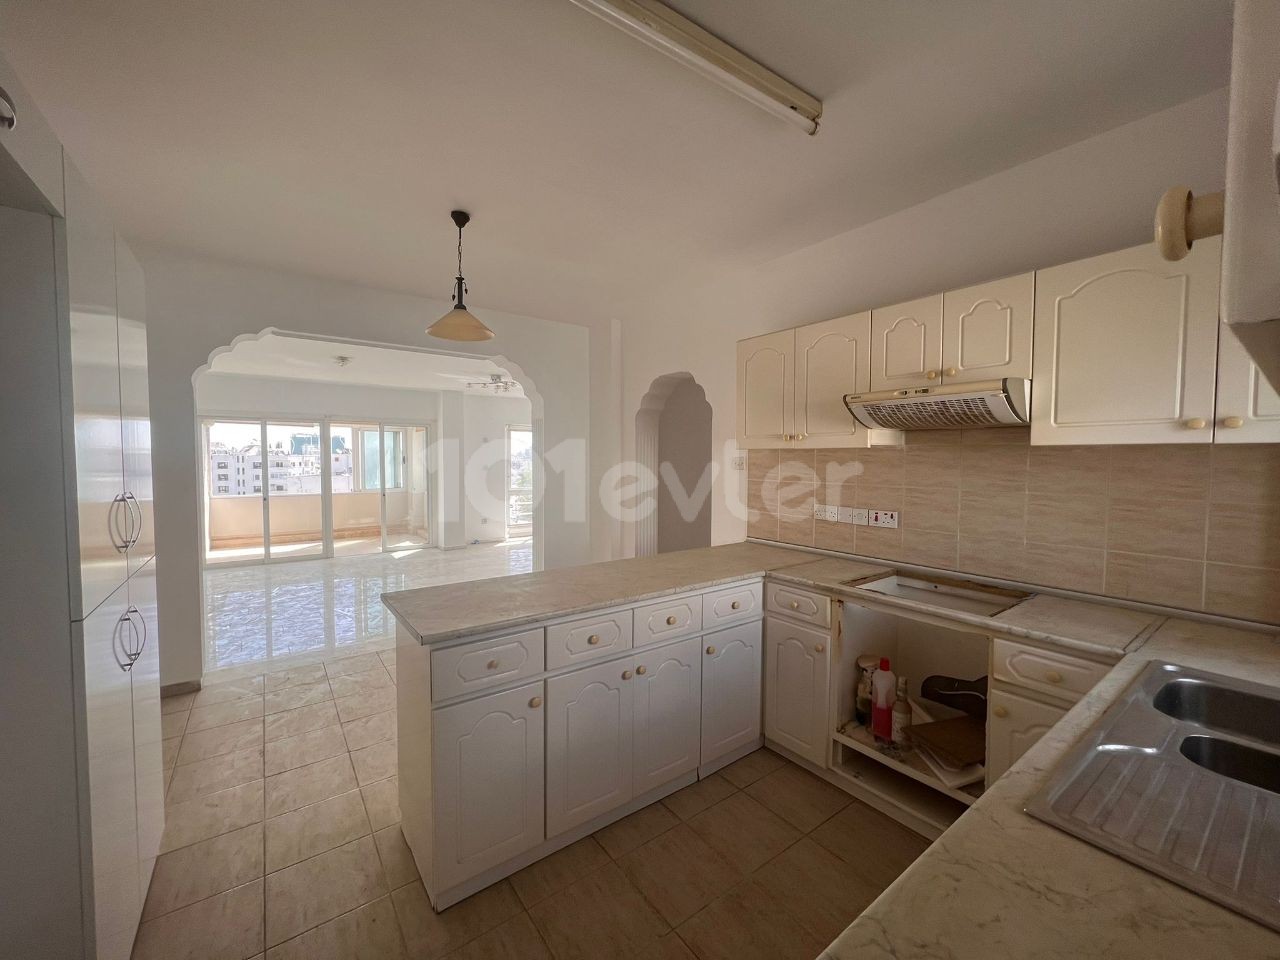 160 M2 ELEVATOR RENTAL APARTMENT WITH COMMERCIAL PERMIT IN DEREBOY, DECENT DISTRICT OF NICOSIA ** 